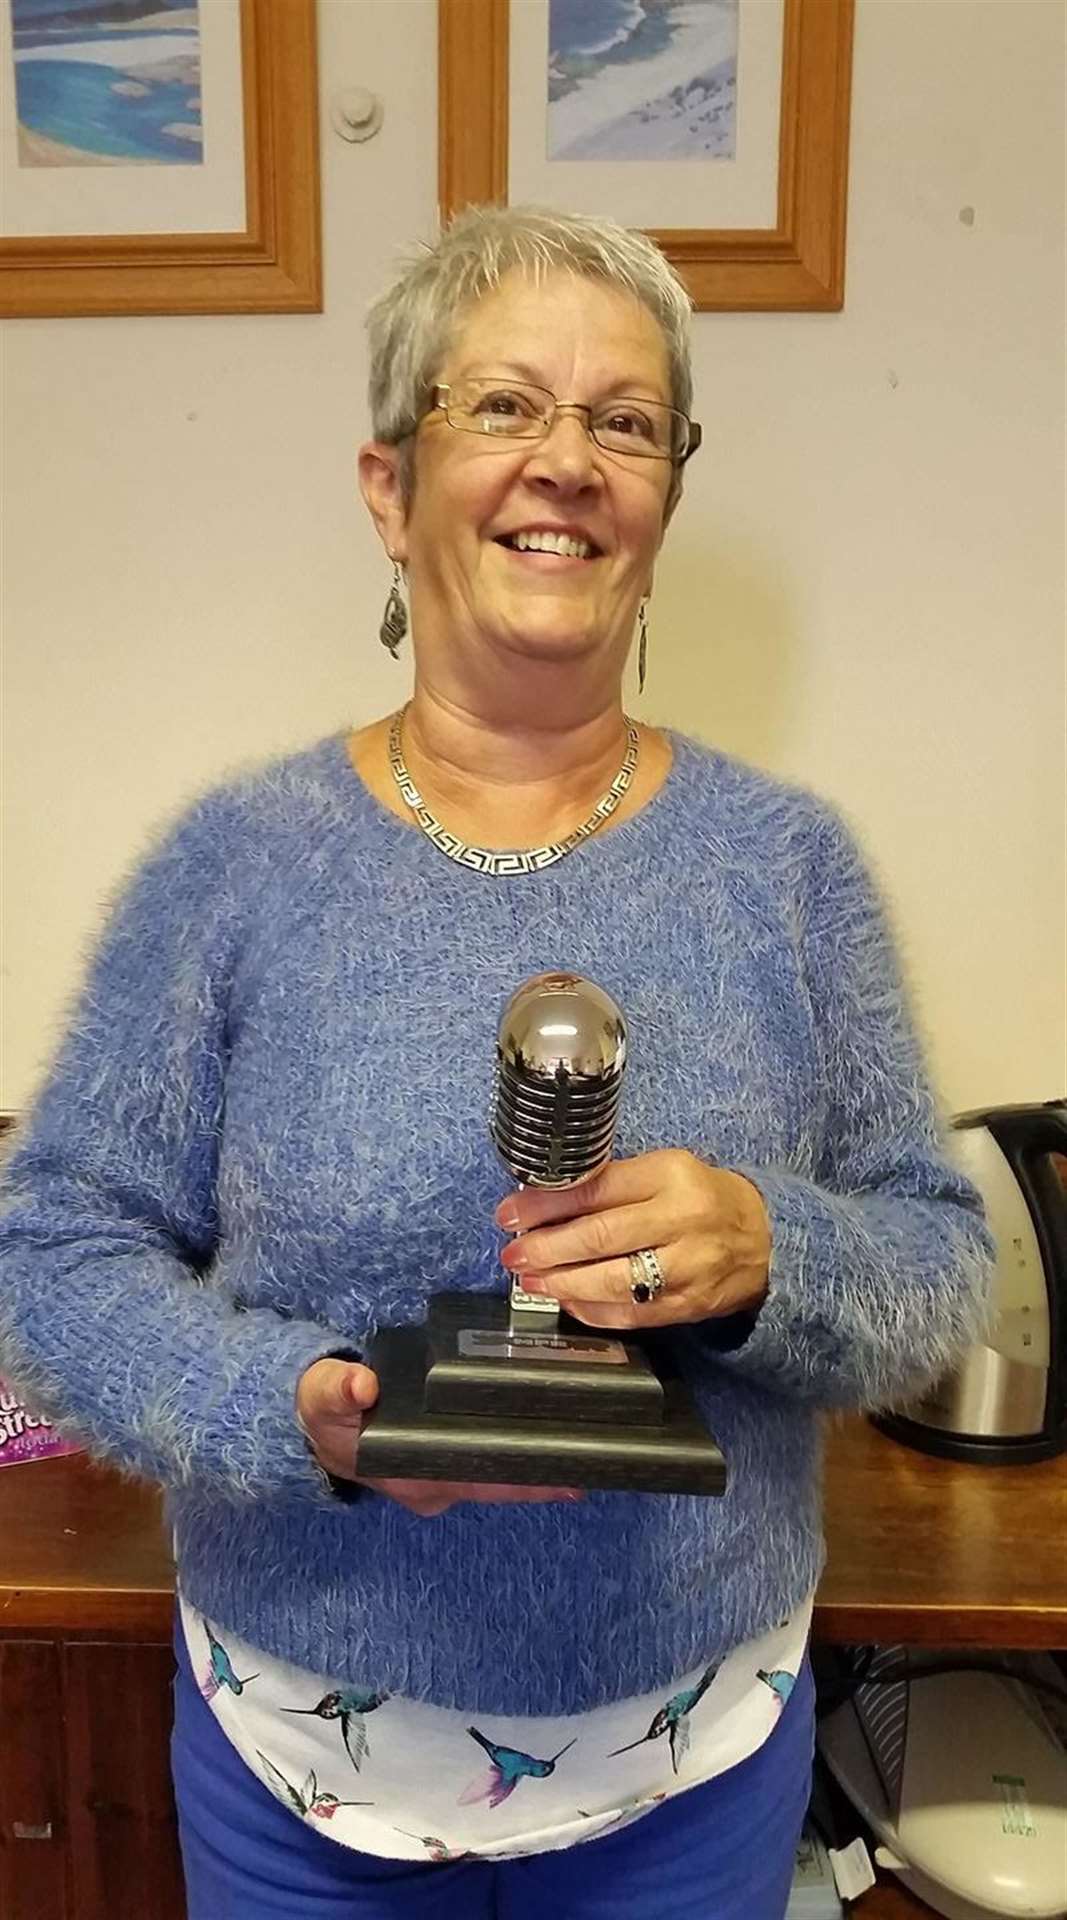 Myra Clark with the MFR Cash for Kids - Community Award which she won in 2017.